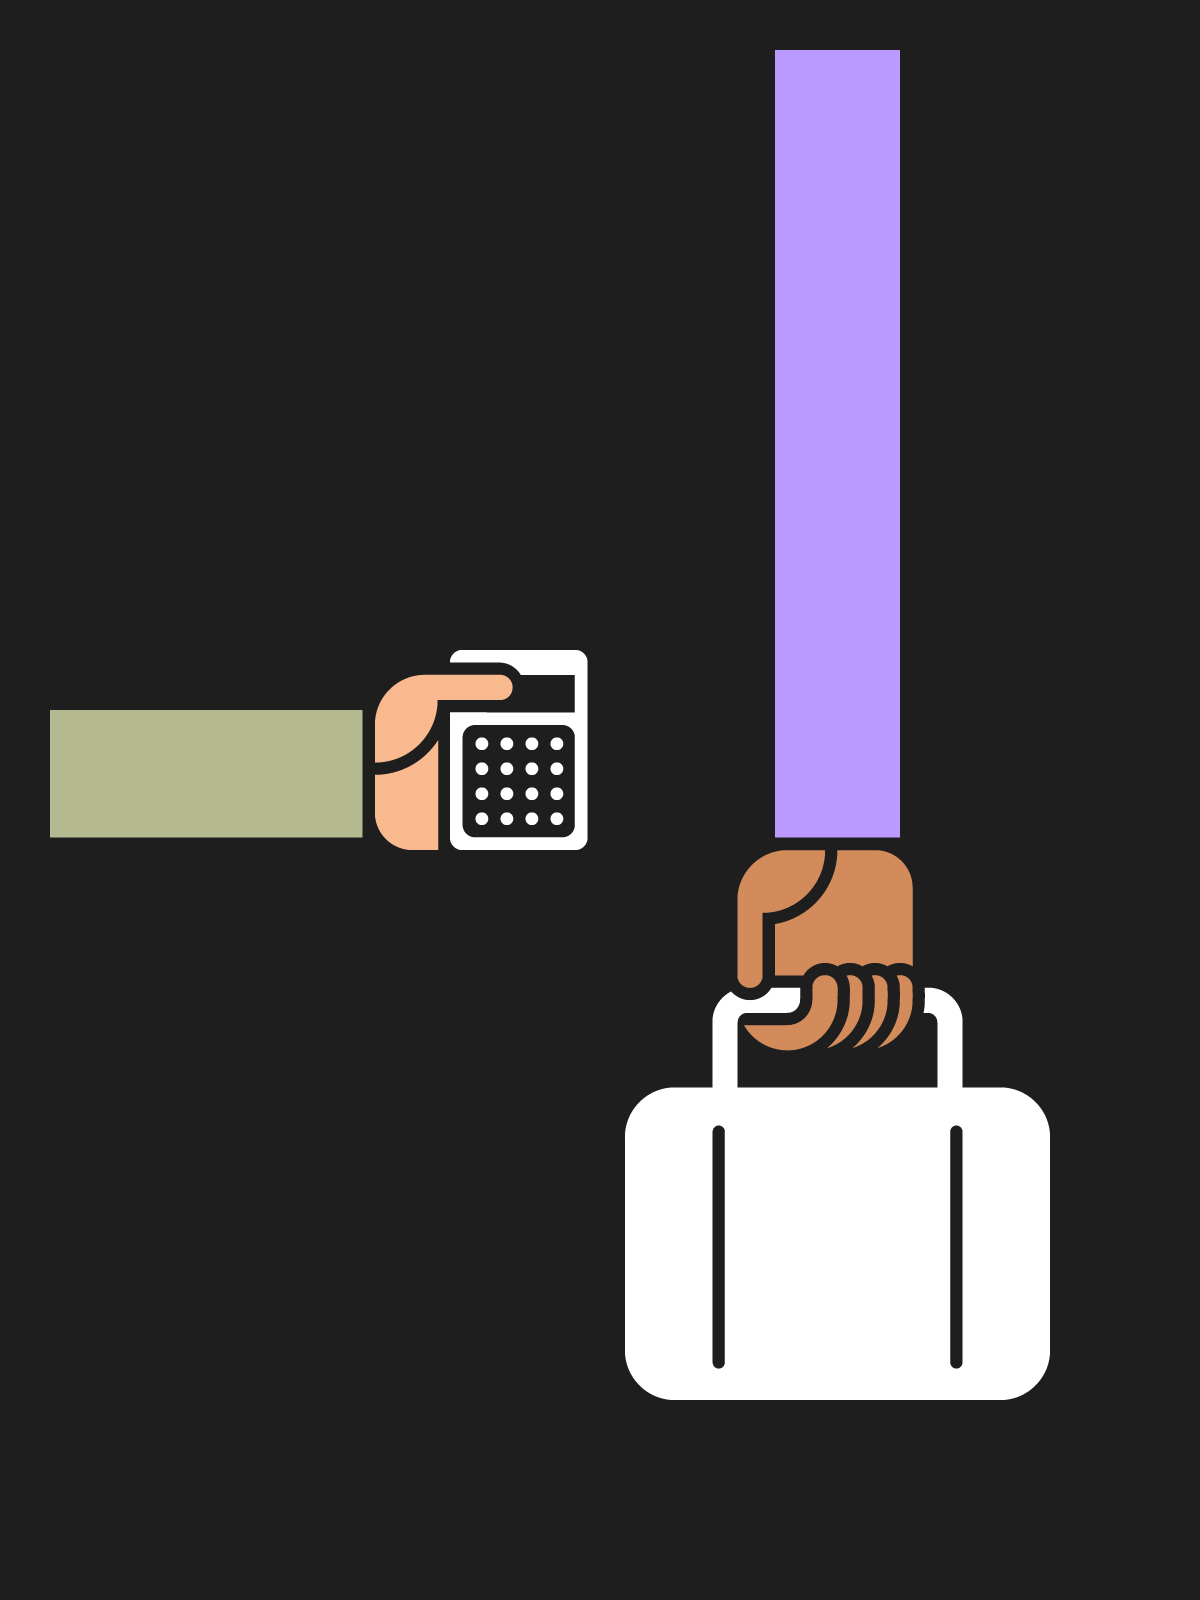 Illustration depicting stylised hands holding a briefcase and calculator.